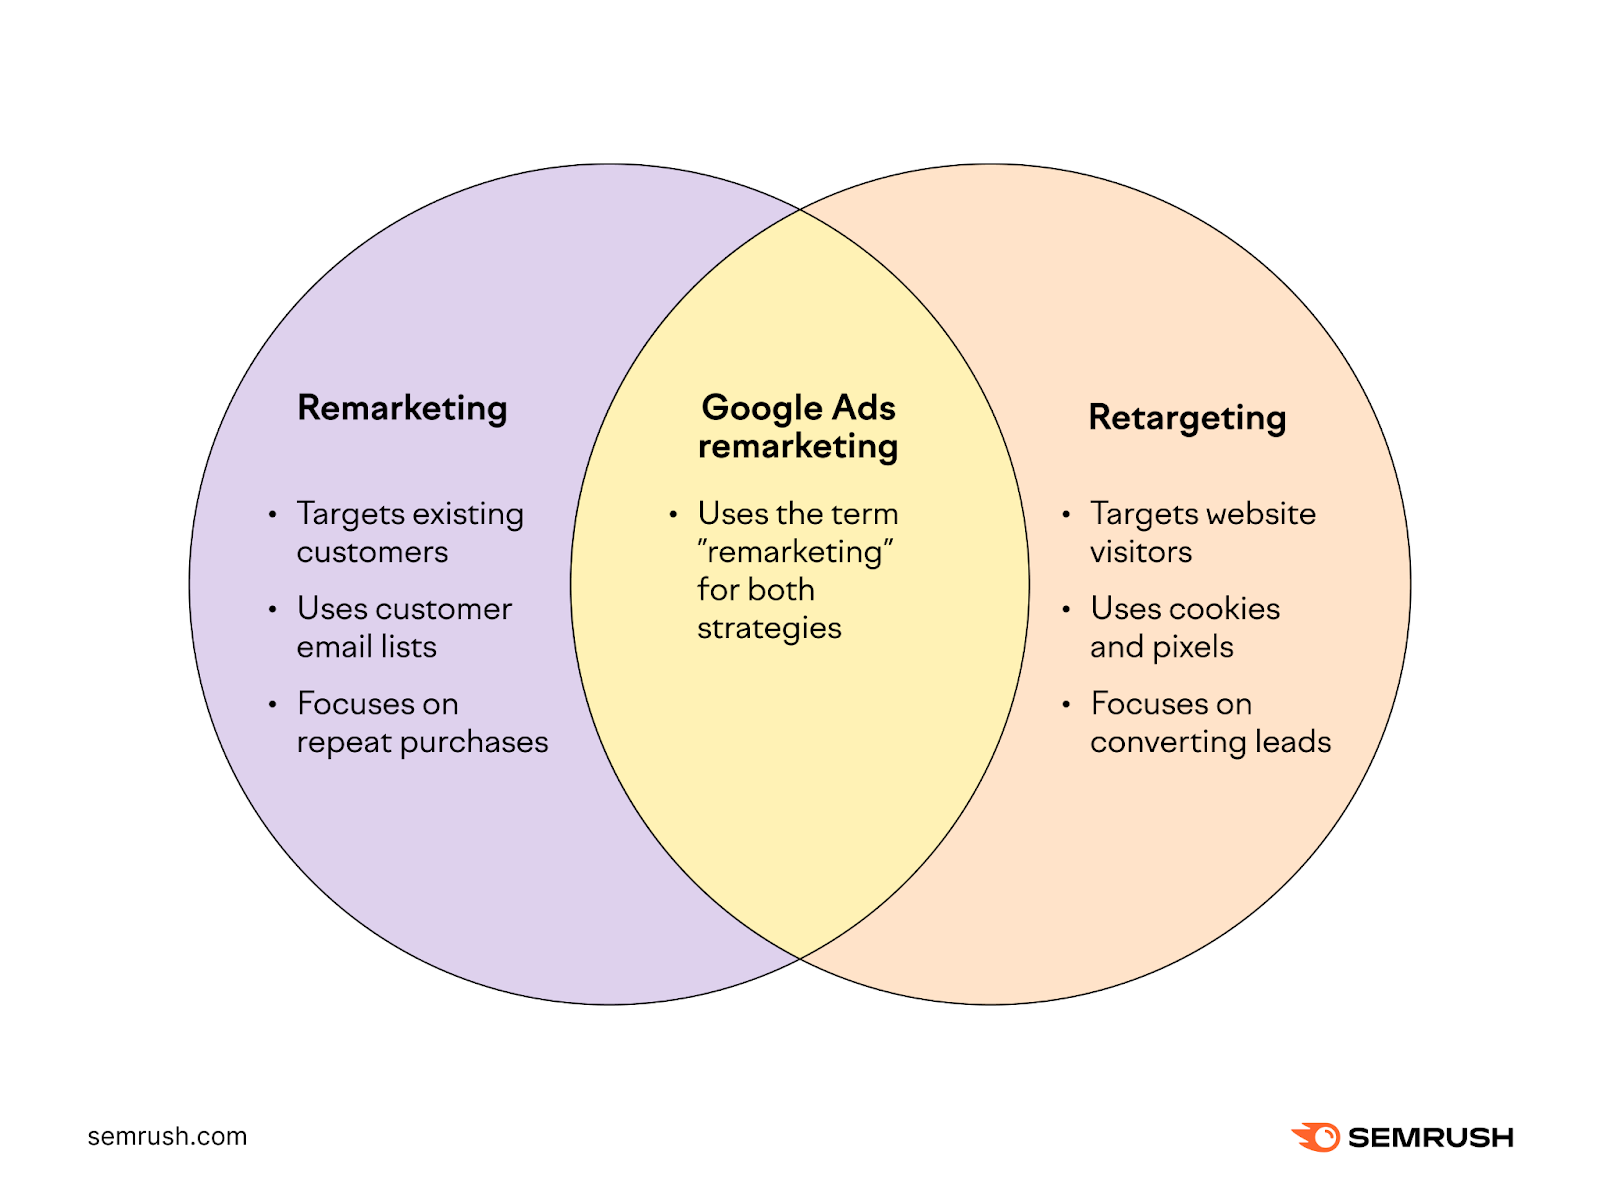 A Venn diagram showing the difference between remarketing and retargeting, and the overlap between the two due to Google Ads using the term for both strategies